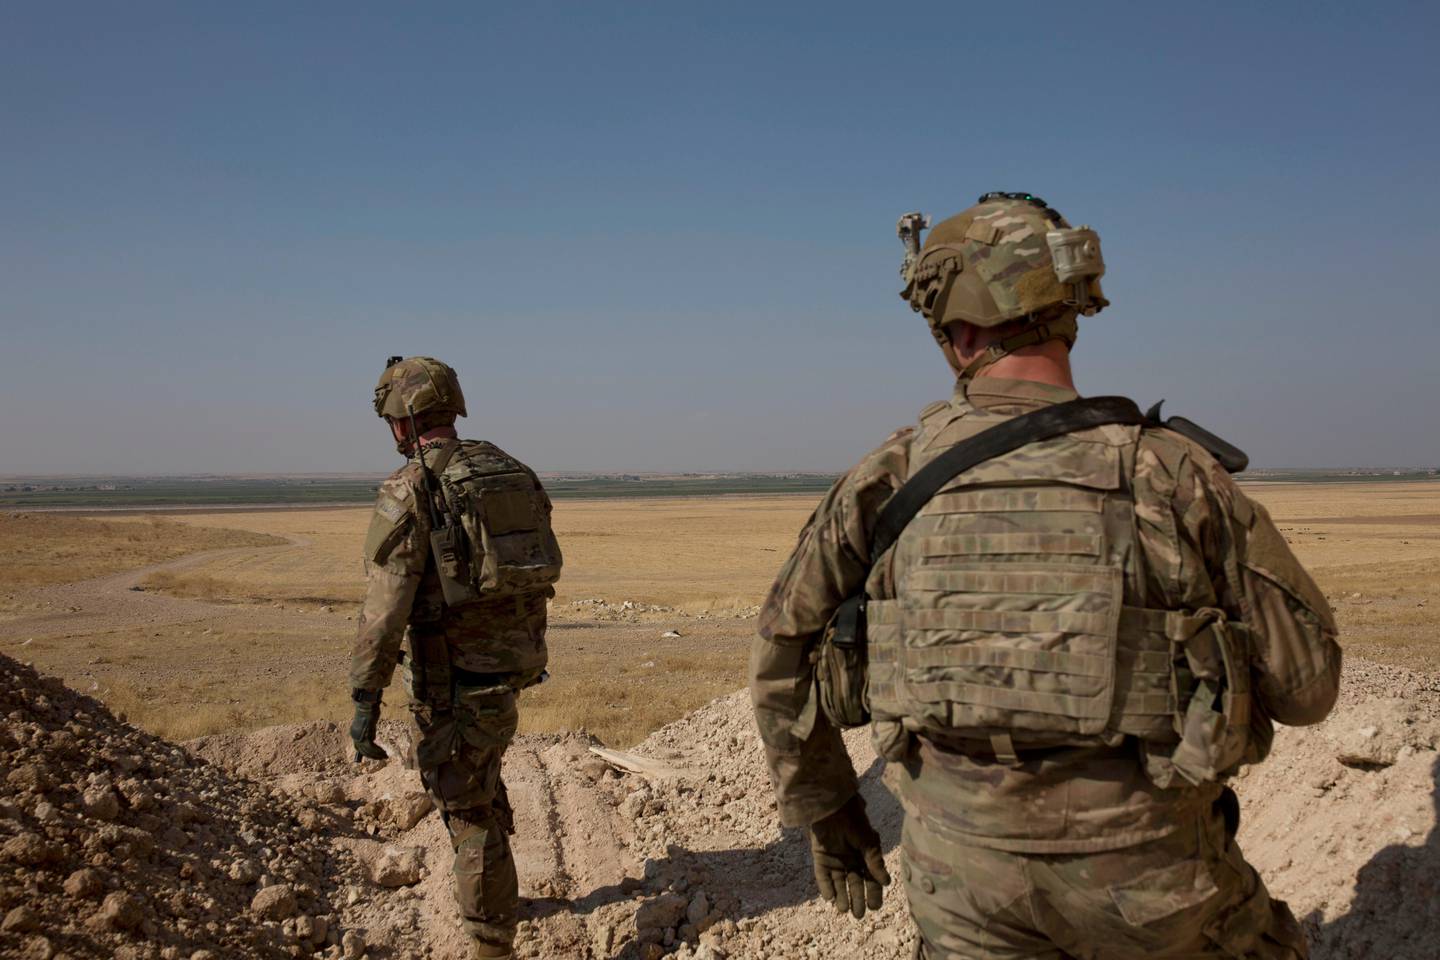 FILE - In this Sept. 6, 2019 file photo, U.S. soldiers survey the the safe zone between Syria and the Turkish border near Tal Abyad, Syria, on a joint patrol with the Tax Abyad Military Council, affiliated with the U.S.-backed Syrian Democratic Forces. Defense Secretary Mark Esper says that under the current plan all U.S. troops leaving Syria will go to western Iraq, and that the military will continue to conduct operations against the Islamic State group to prevent a resurgence in that country. (AP Photo/Maya Alleruzzo, File)